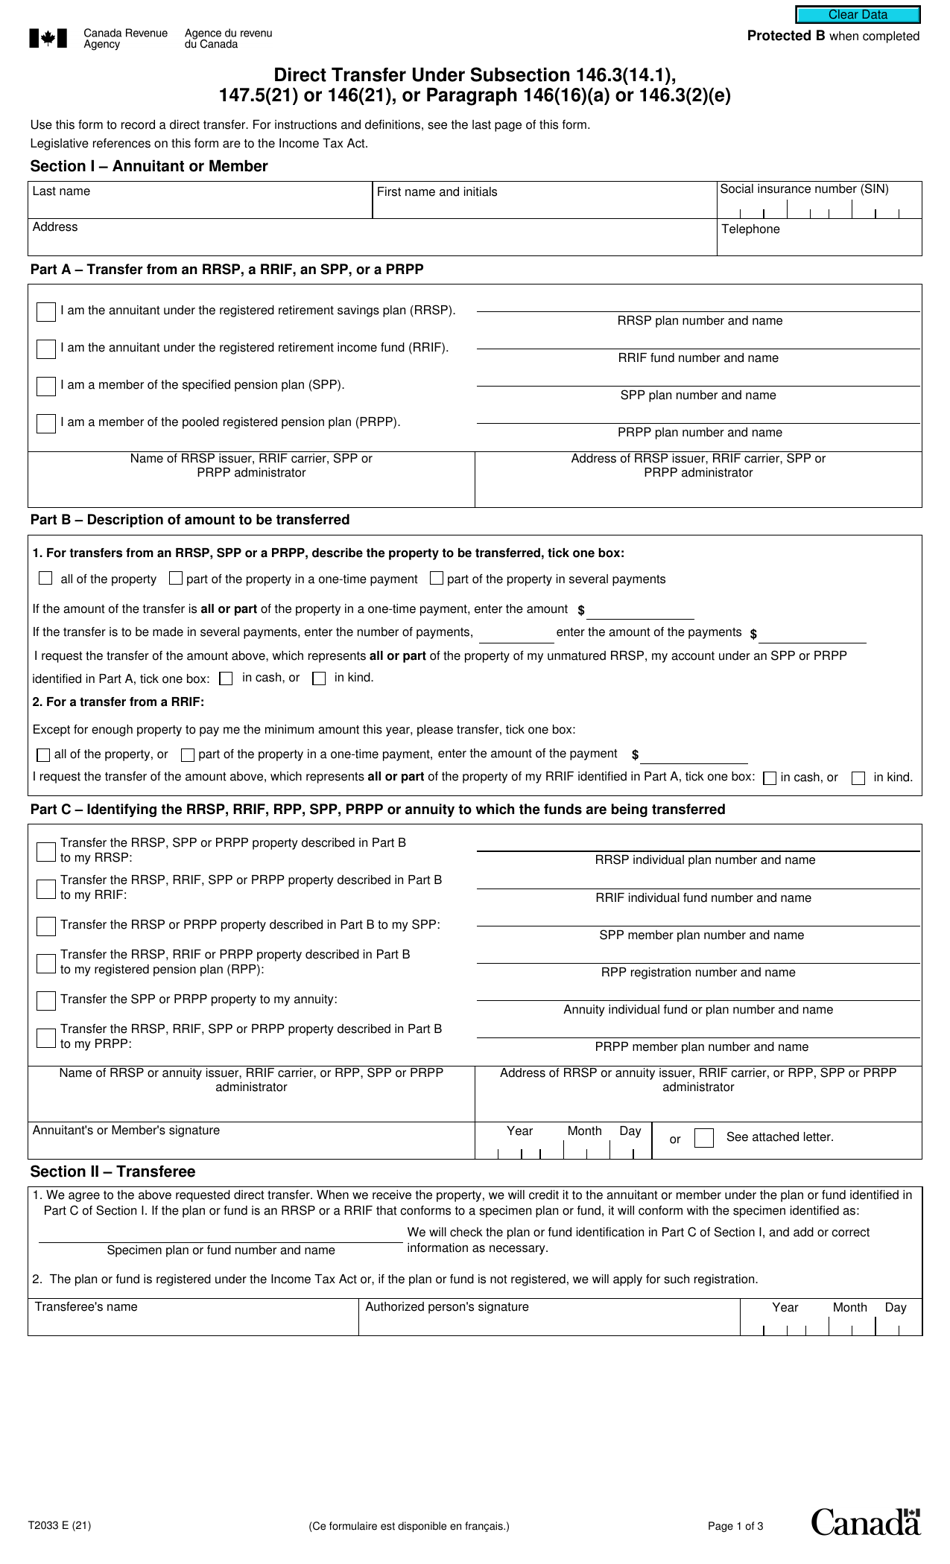 Form T2033 Direct Transfer Under Subsection 146.3(14.1), 147.5(21) or 146(21), or Paragraph 146(16)(A) or 146.3(2)(E) - Canada, Page 1